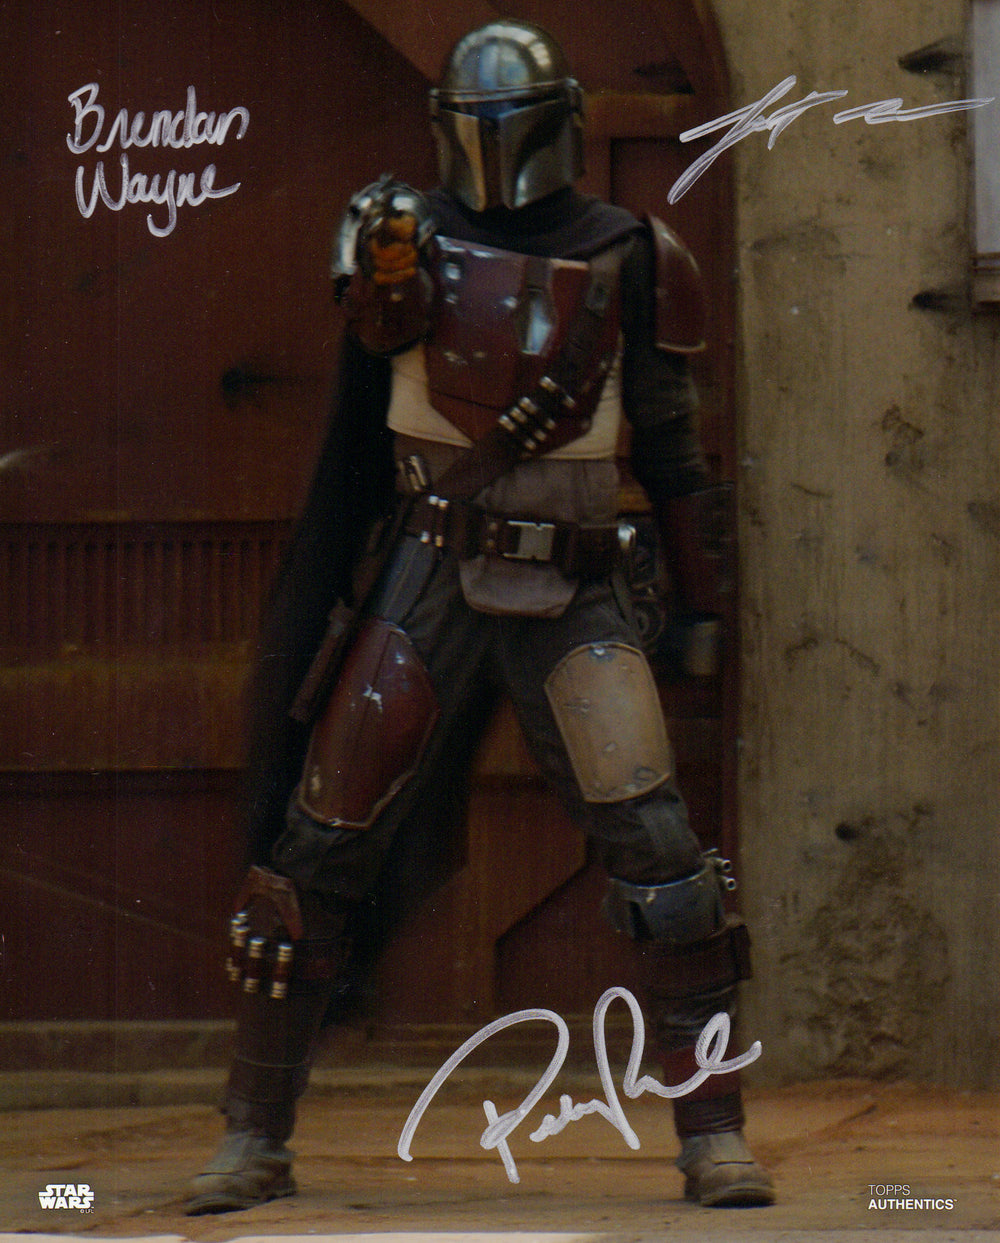 Pedro Pascal, Lateef Crowder, and Brendan Wayne as the Mandalorian in Star Wars: The Mandalorian (Beckett Witnessed) Signed 8x10 Photo